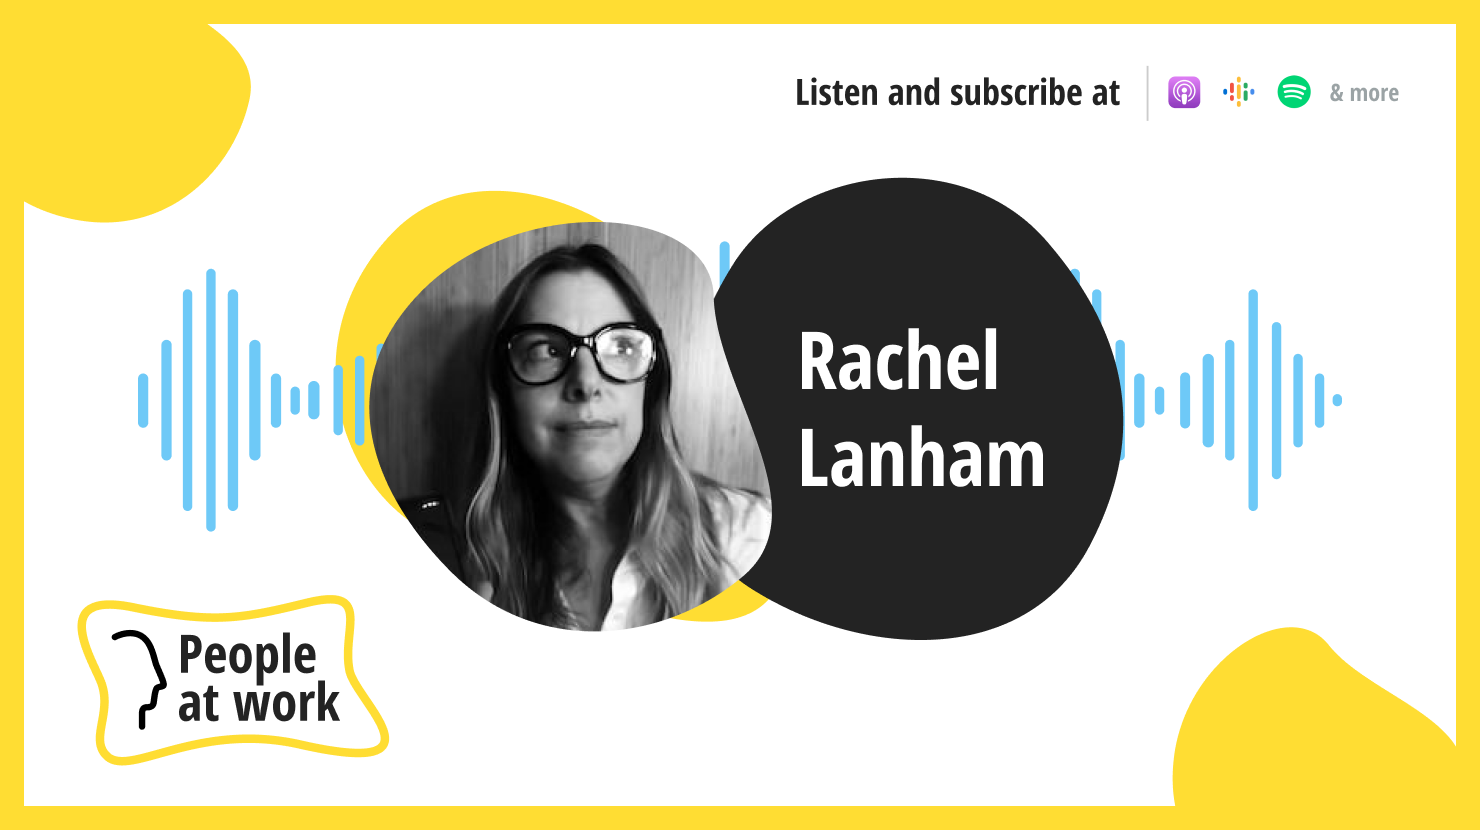 The challenges and opportunities of hybrid work with Rachel Lanham